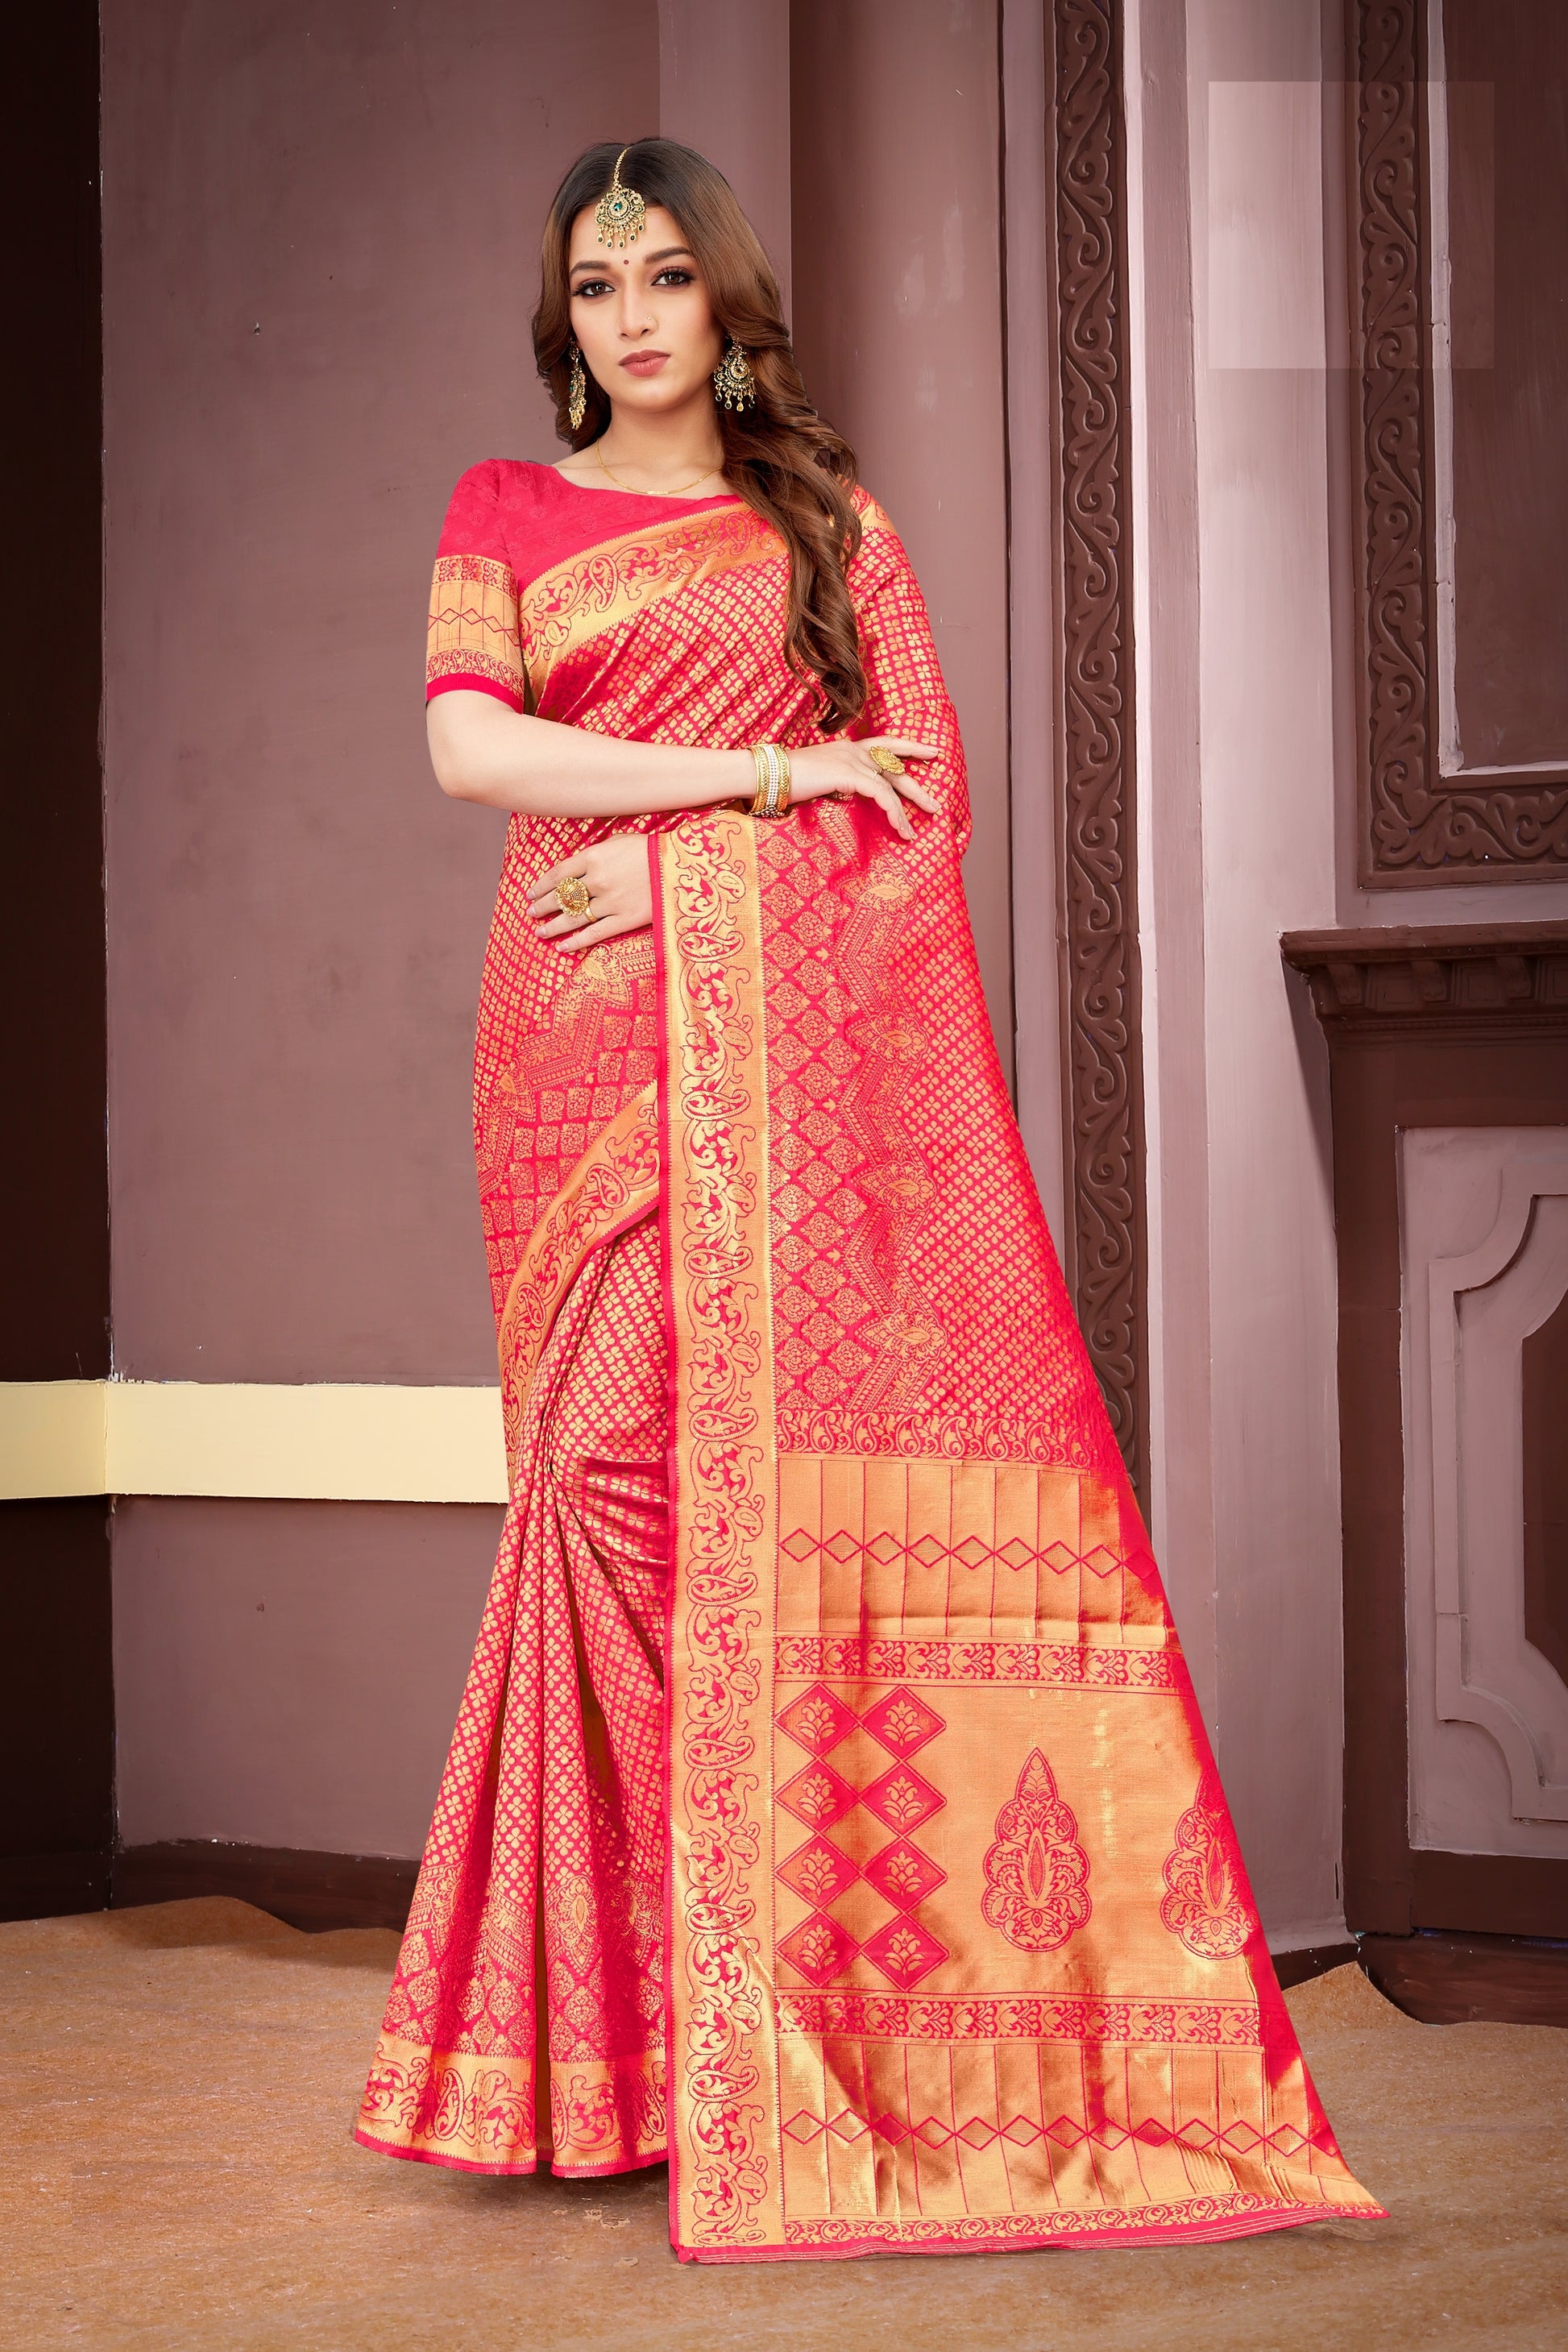 FASHION BOOMS RANI BANARSI SILK TRADITIONAL SAREE WITH 7 OTHER COLORS FOR WHOLE FAMILY TO WEAR ON ANY OCCASION .